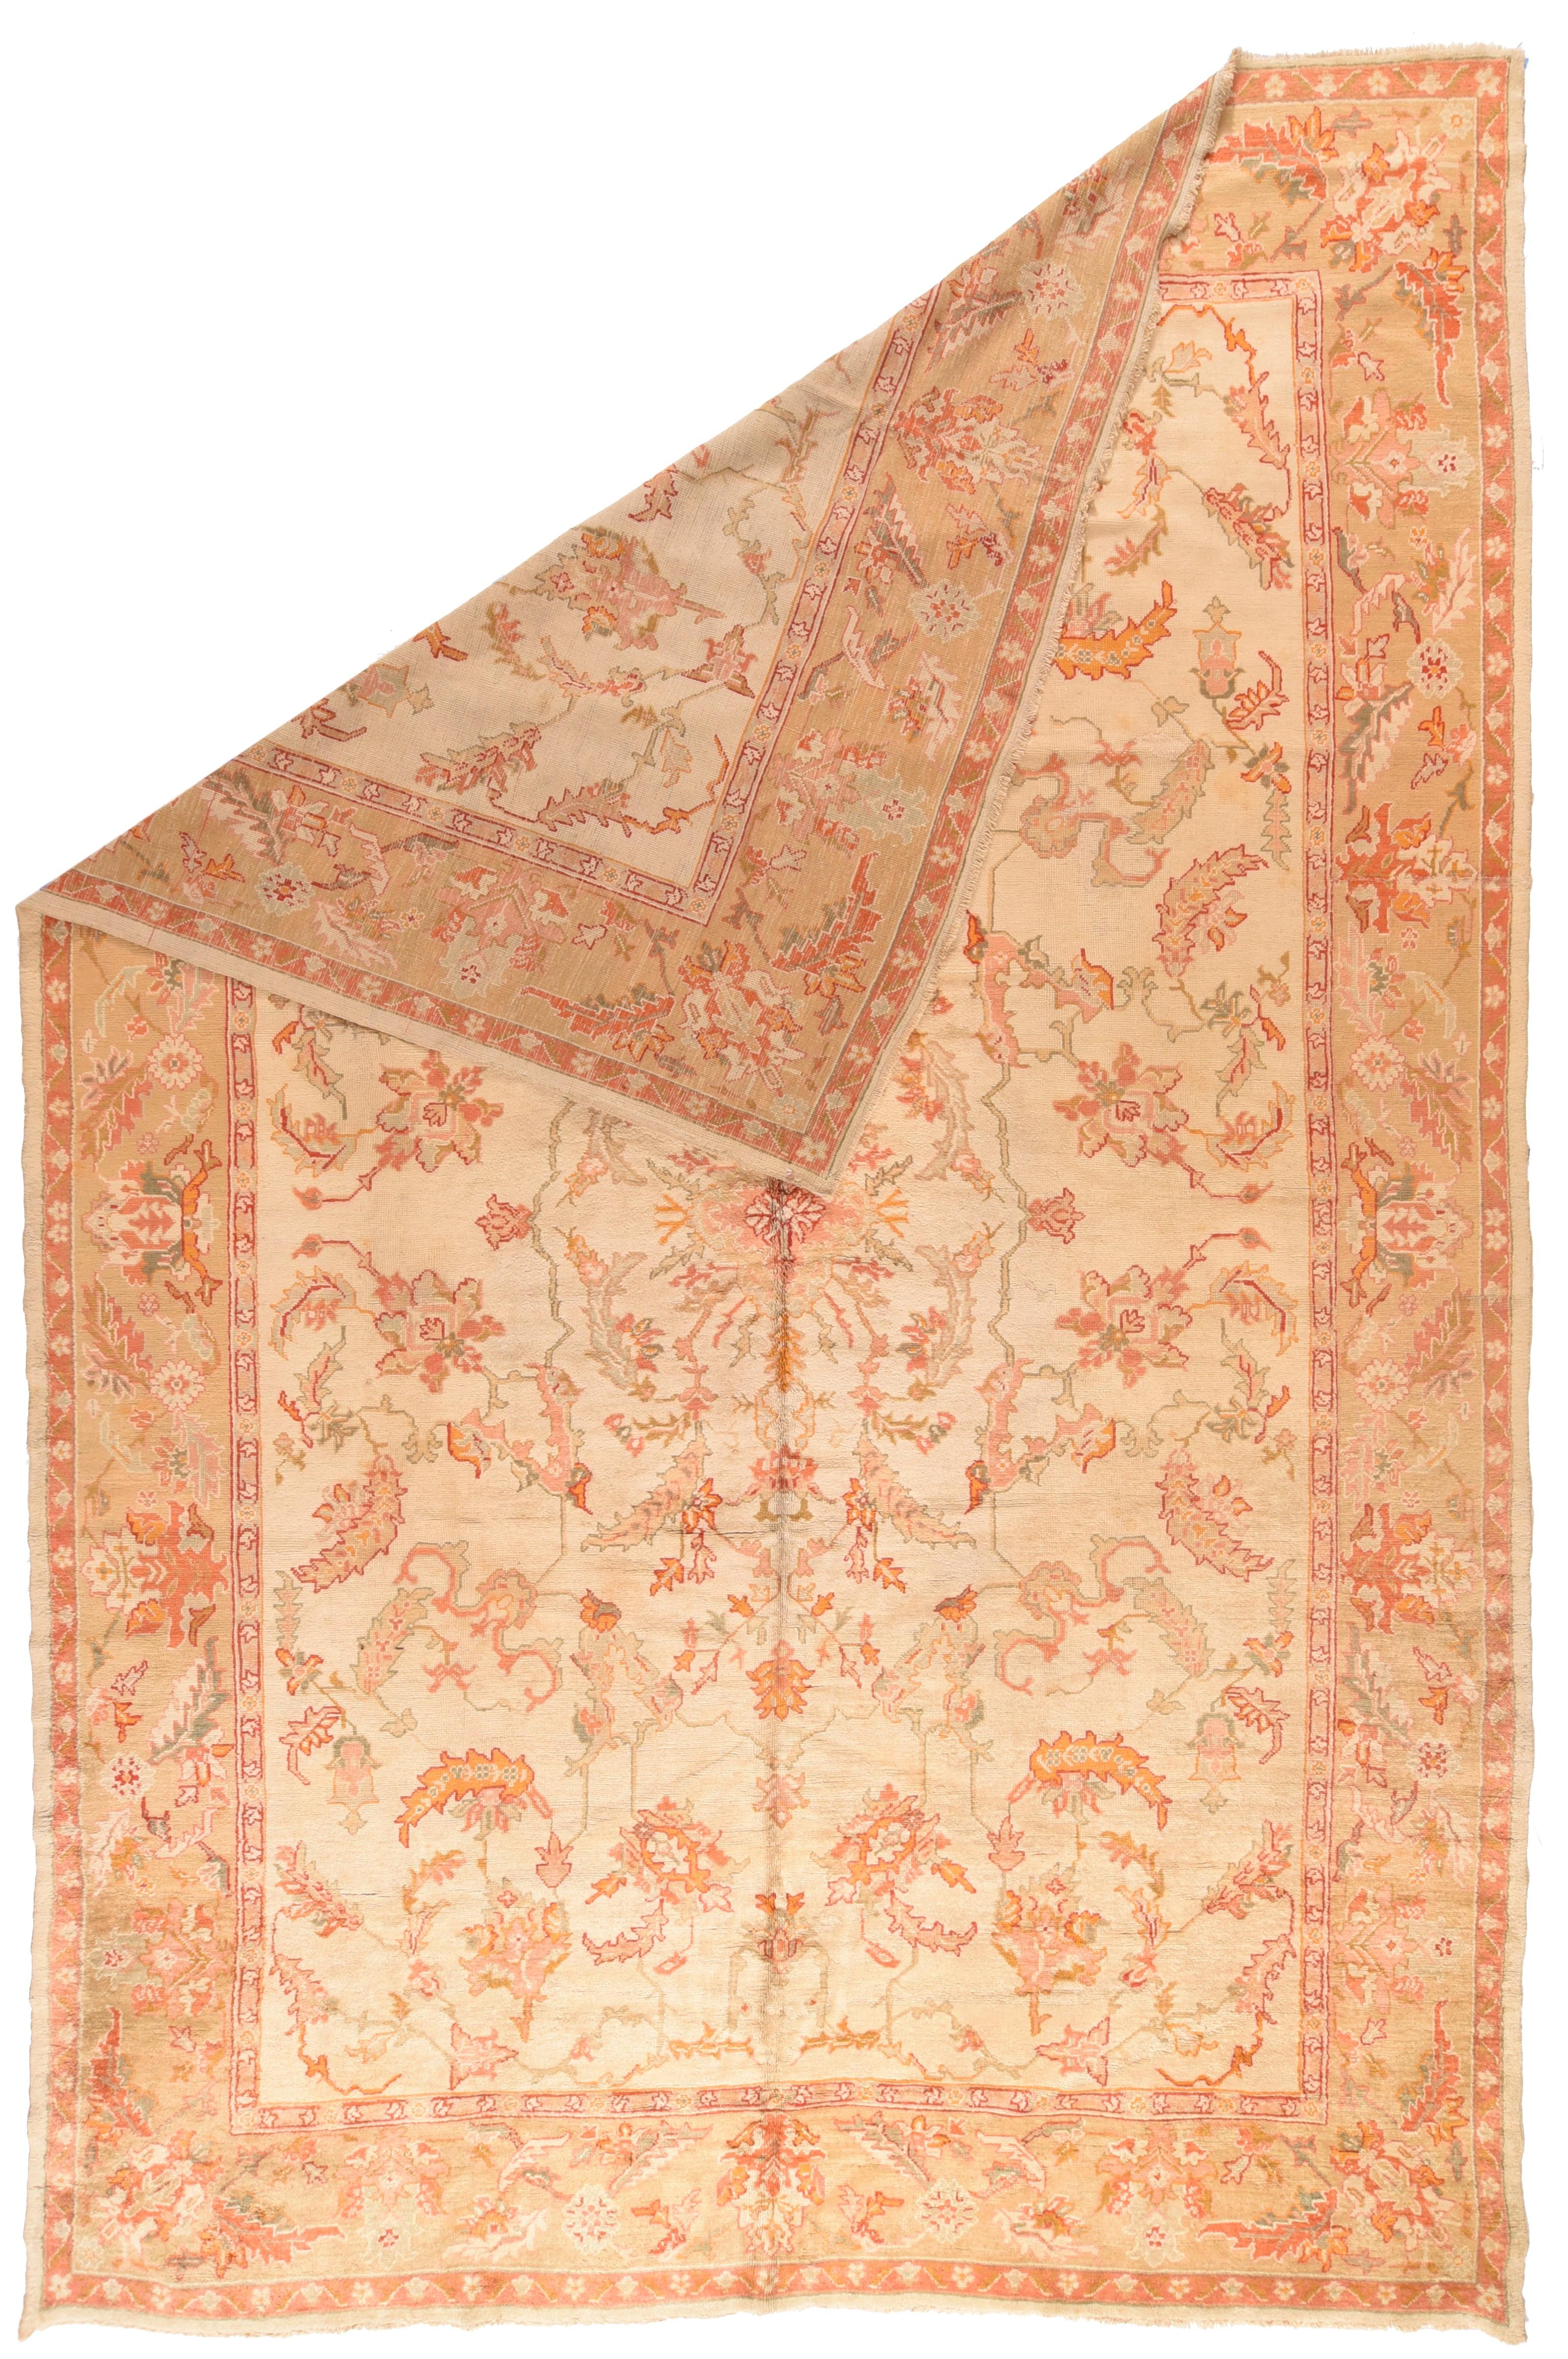 Antique Oushak Rug 9'5'' x 15'9''. The sandy straw field features a four-way layout of cloud bands, barbed lancet leaves, curving vinery and angled palmettes, all around a small, rayed central medallion. Buff border with two palmette types. Accents